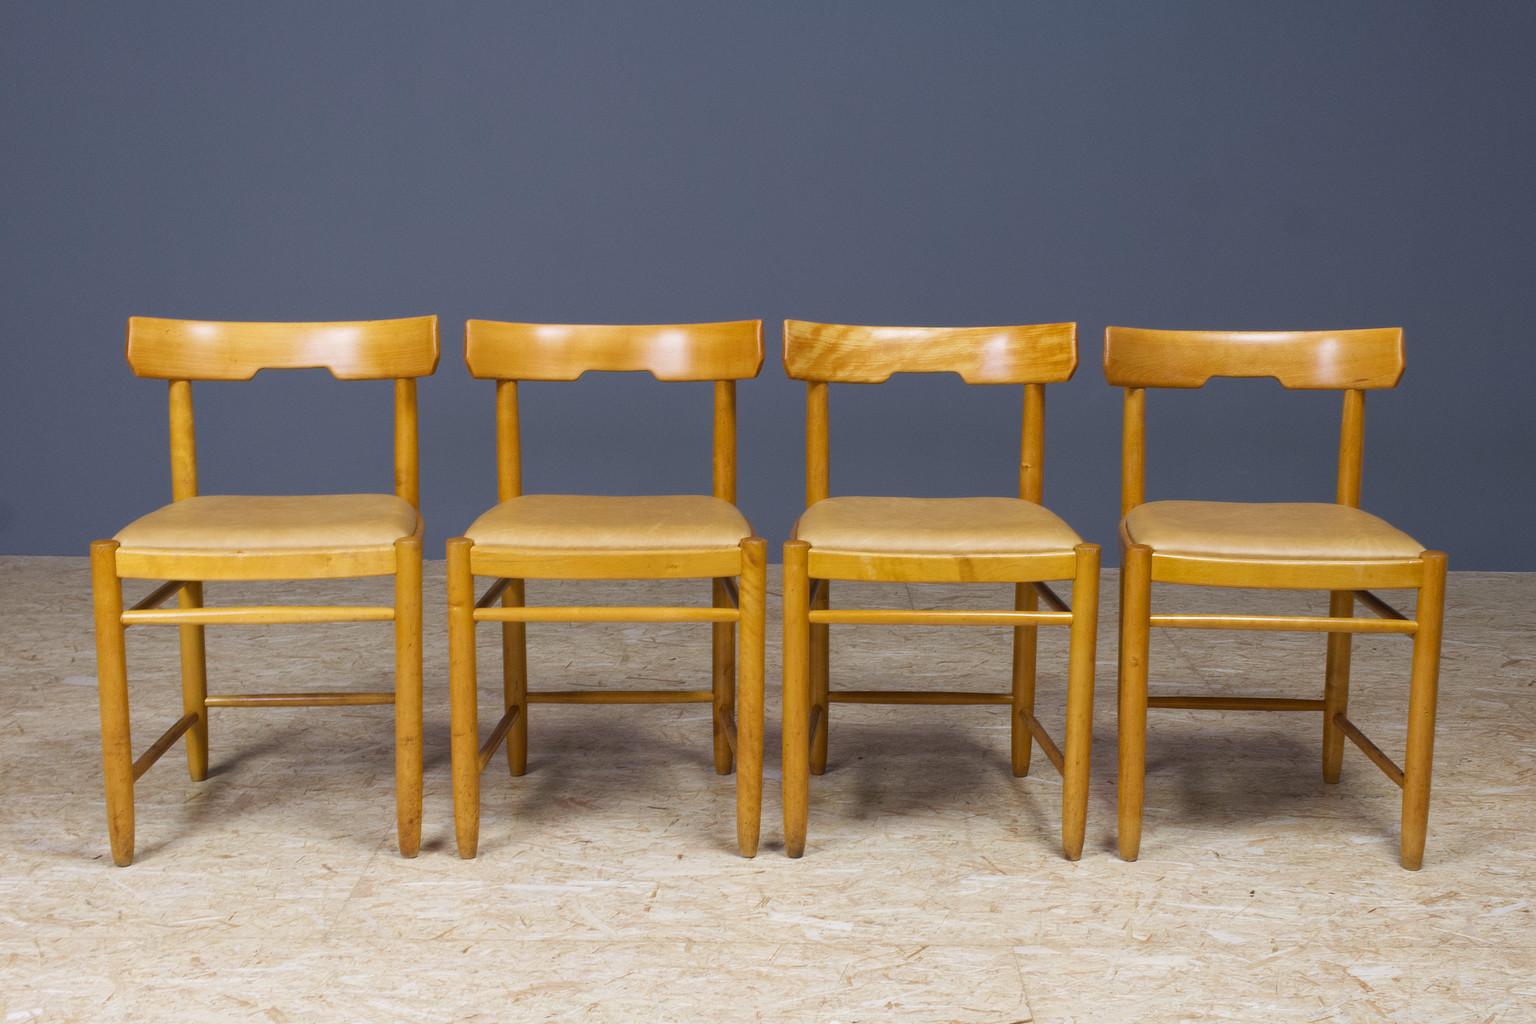 Scandinavian Modern Dining Chairs in Beech and Tan Leather, 1960s Set of 4 For Sale 3